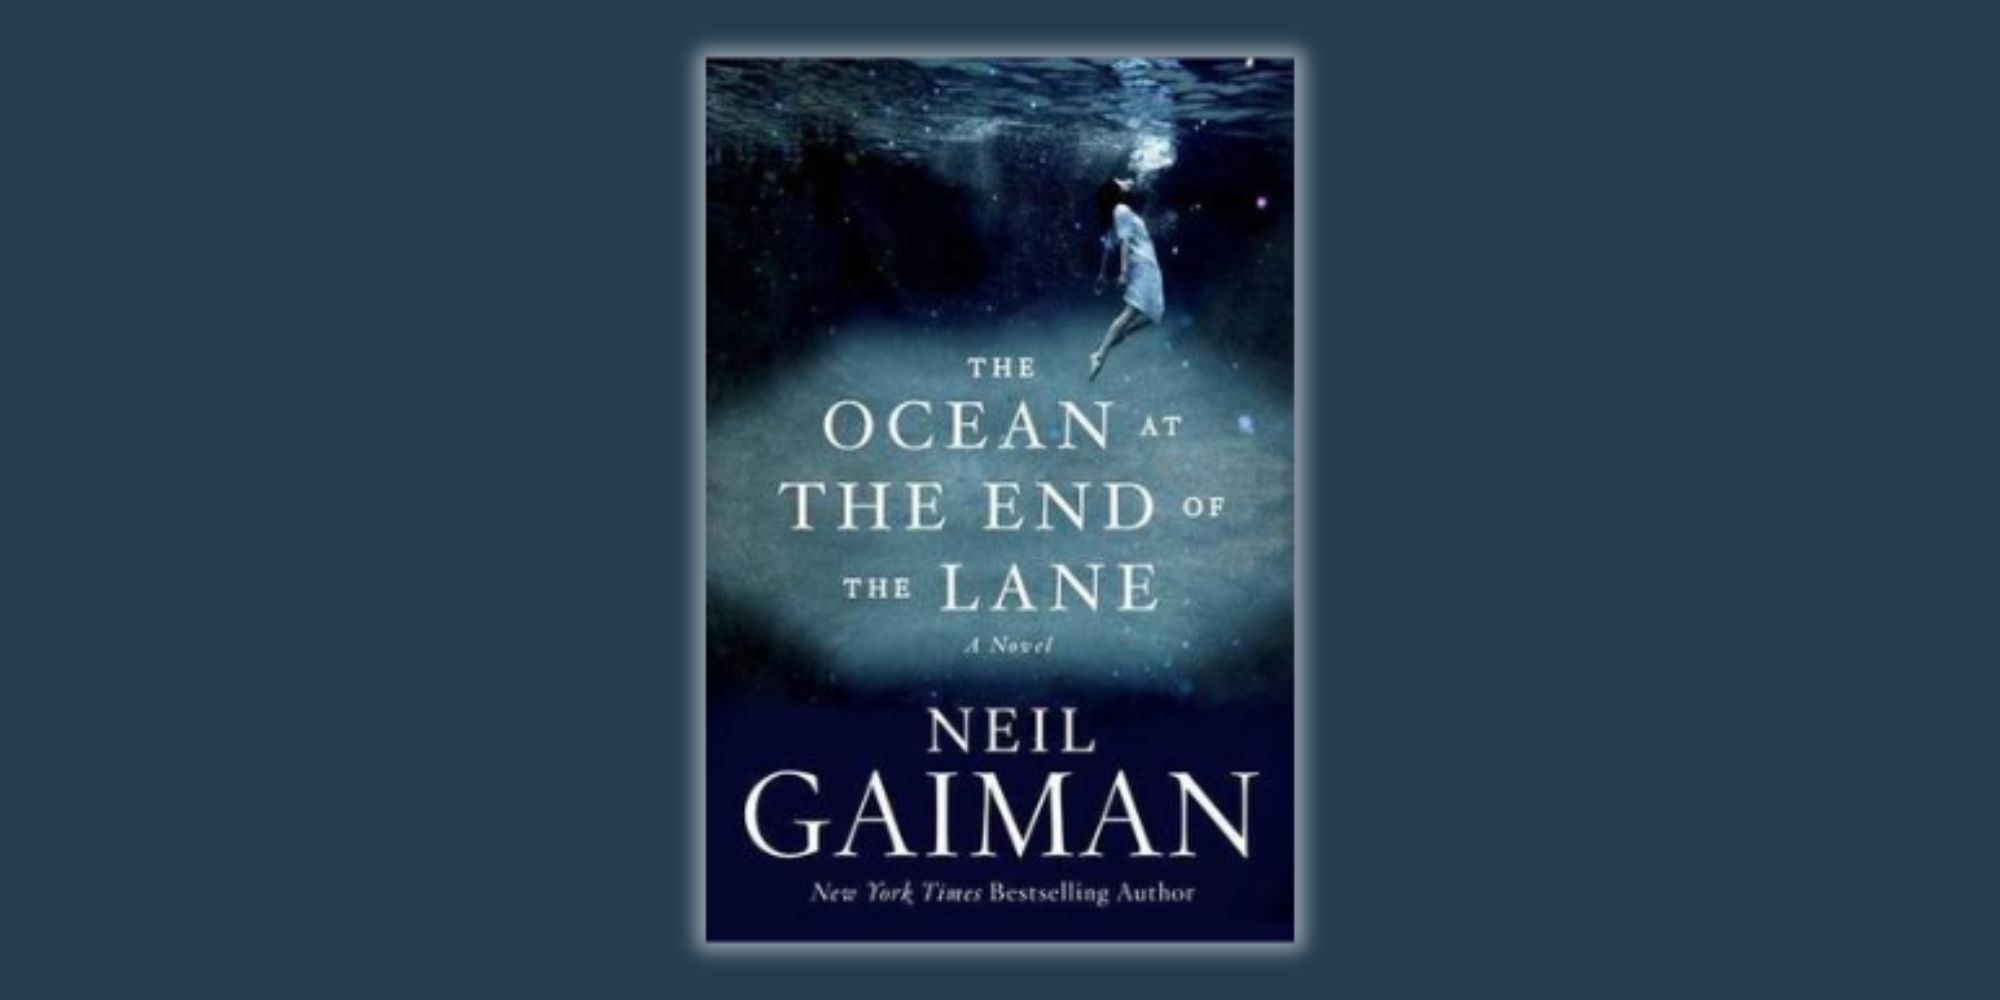 The Ocean at the End of the Lane book cover